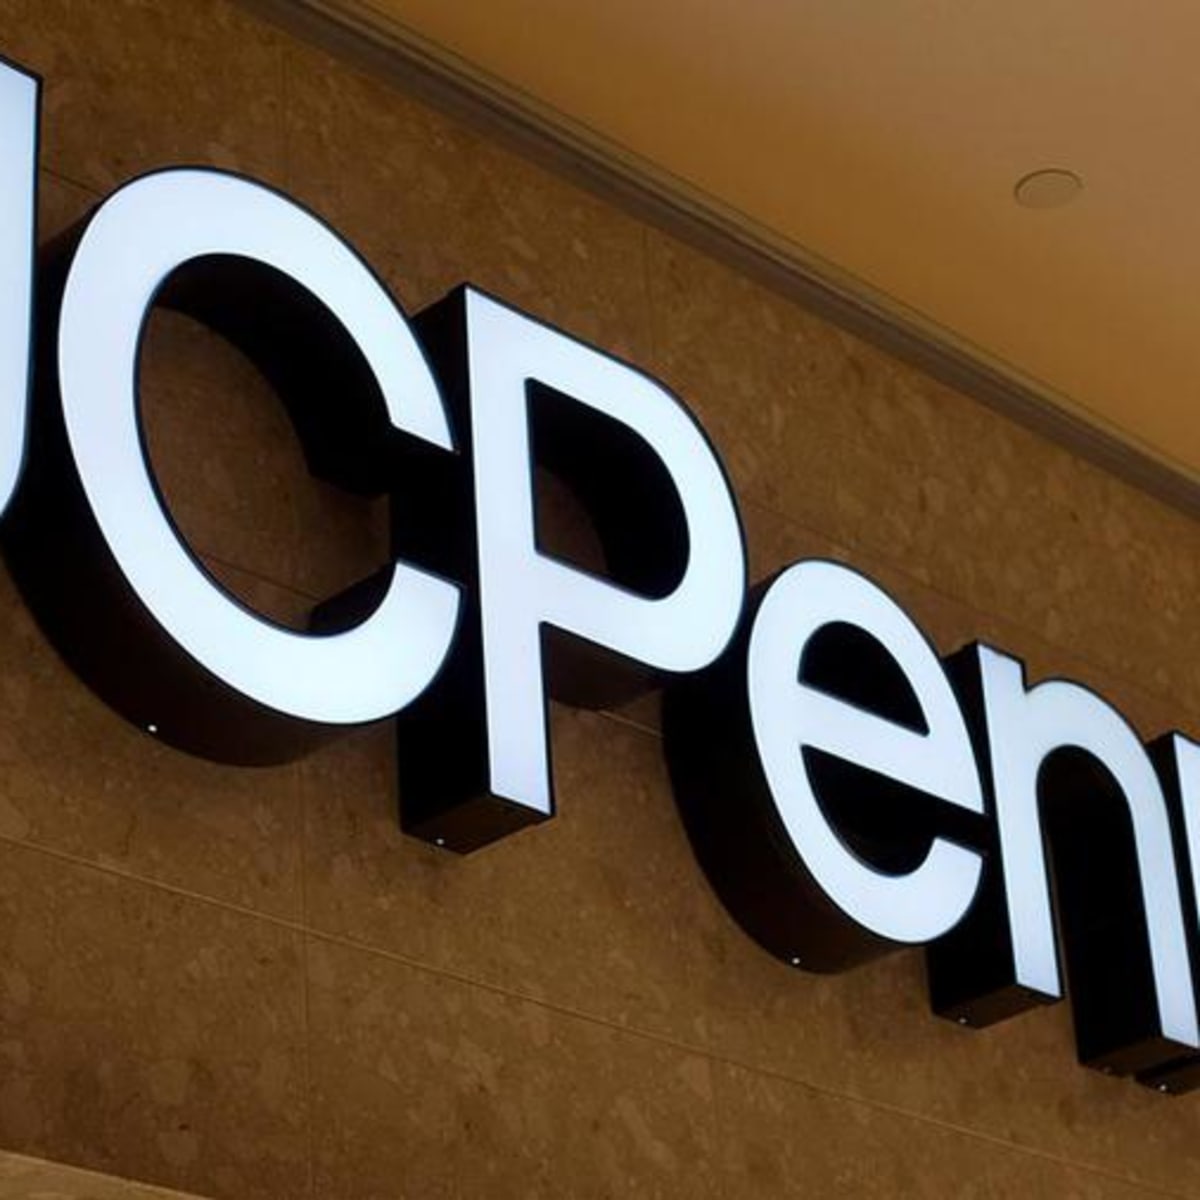 JC Penney shares dive as sales fall short despite narrower loss